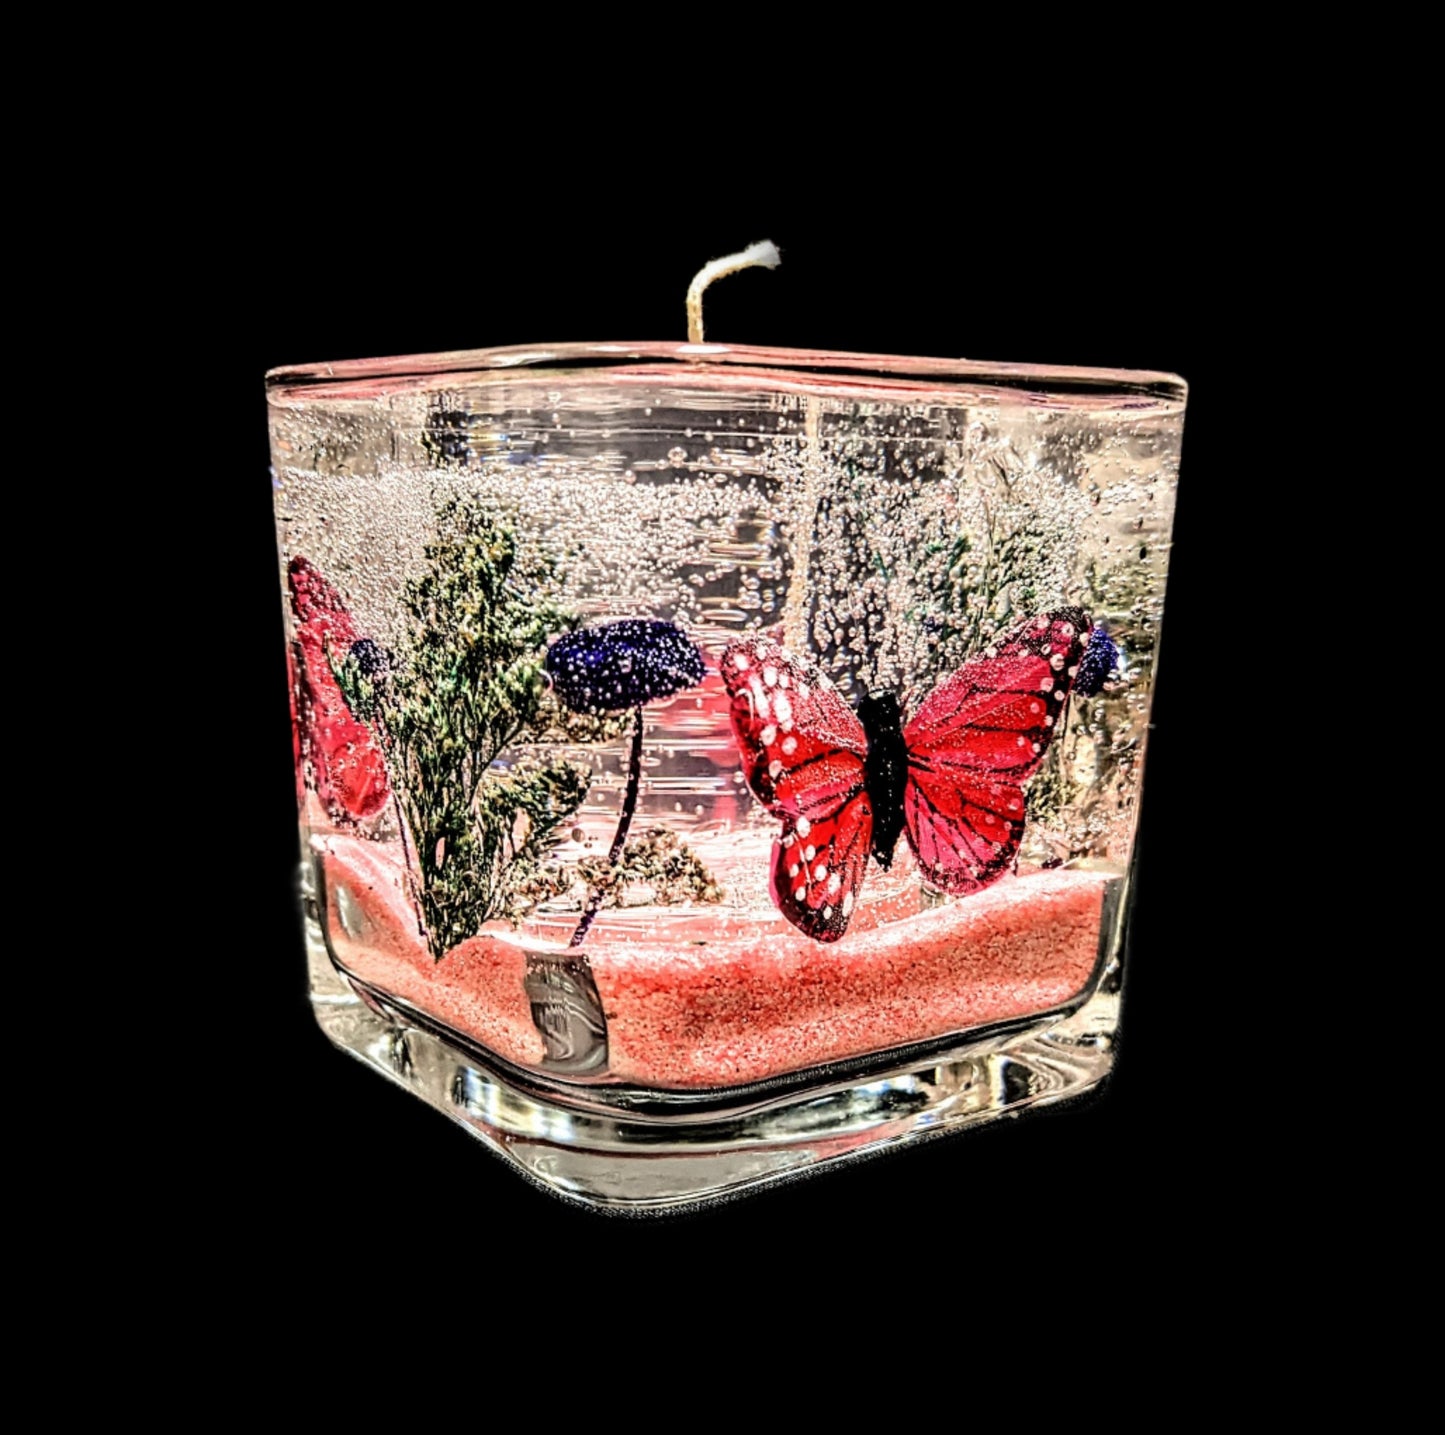 Small Square Butterfly Candles